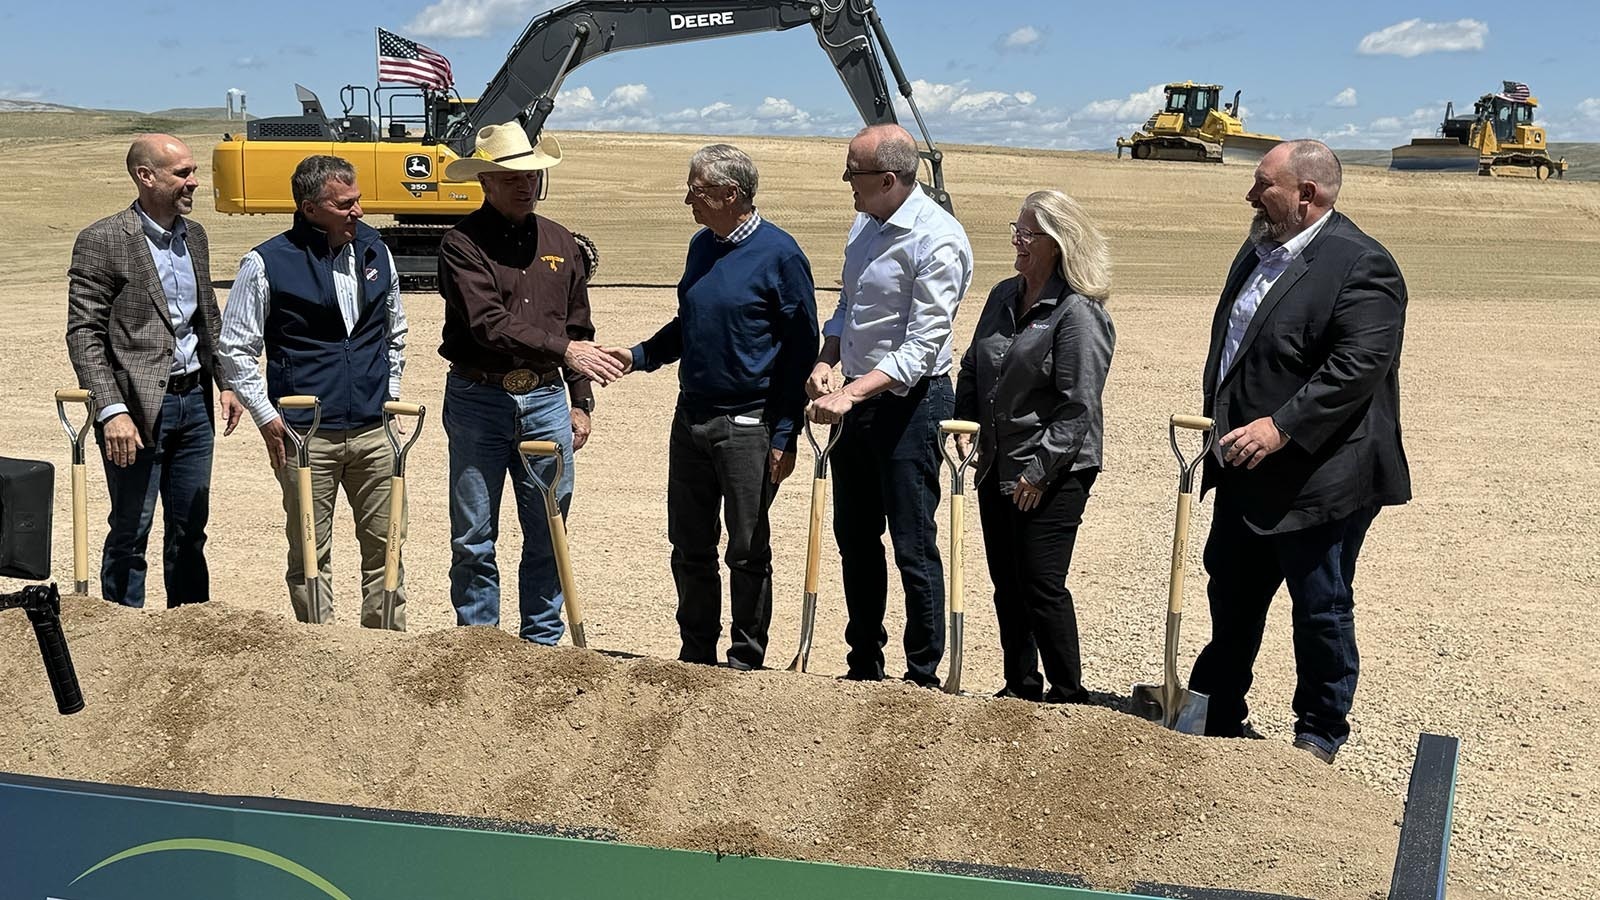 Wyoming Gov. Mark Gordon and billionaire Bill Gates shake hands at a groundbreaking ceremony for TerraPower’s nuclear reactor project in Kemmerer, Wyoming.